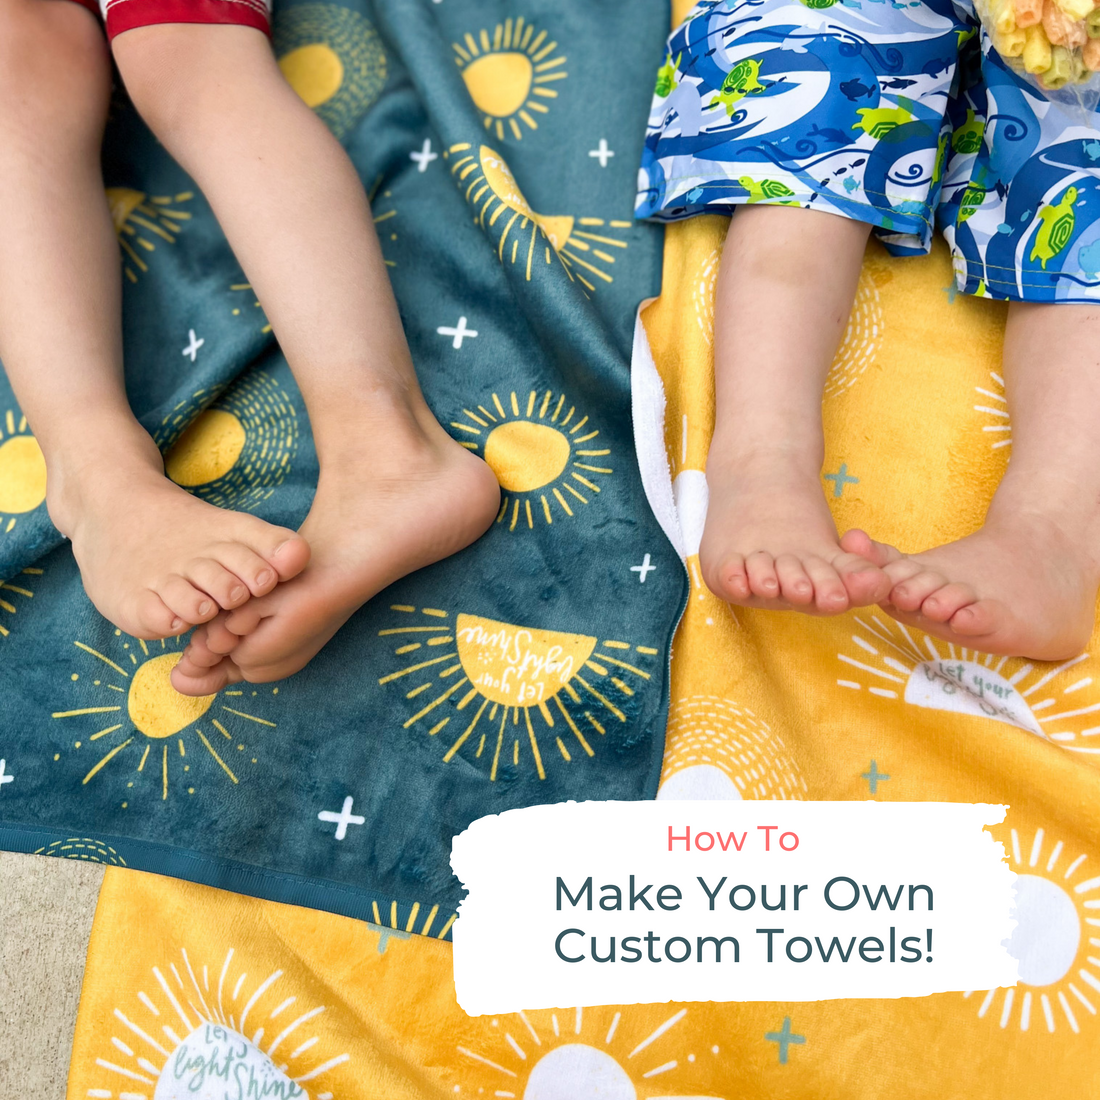 Design Your Own Towels!